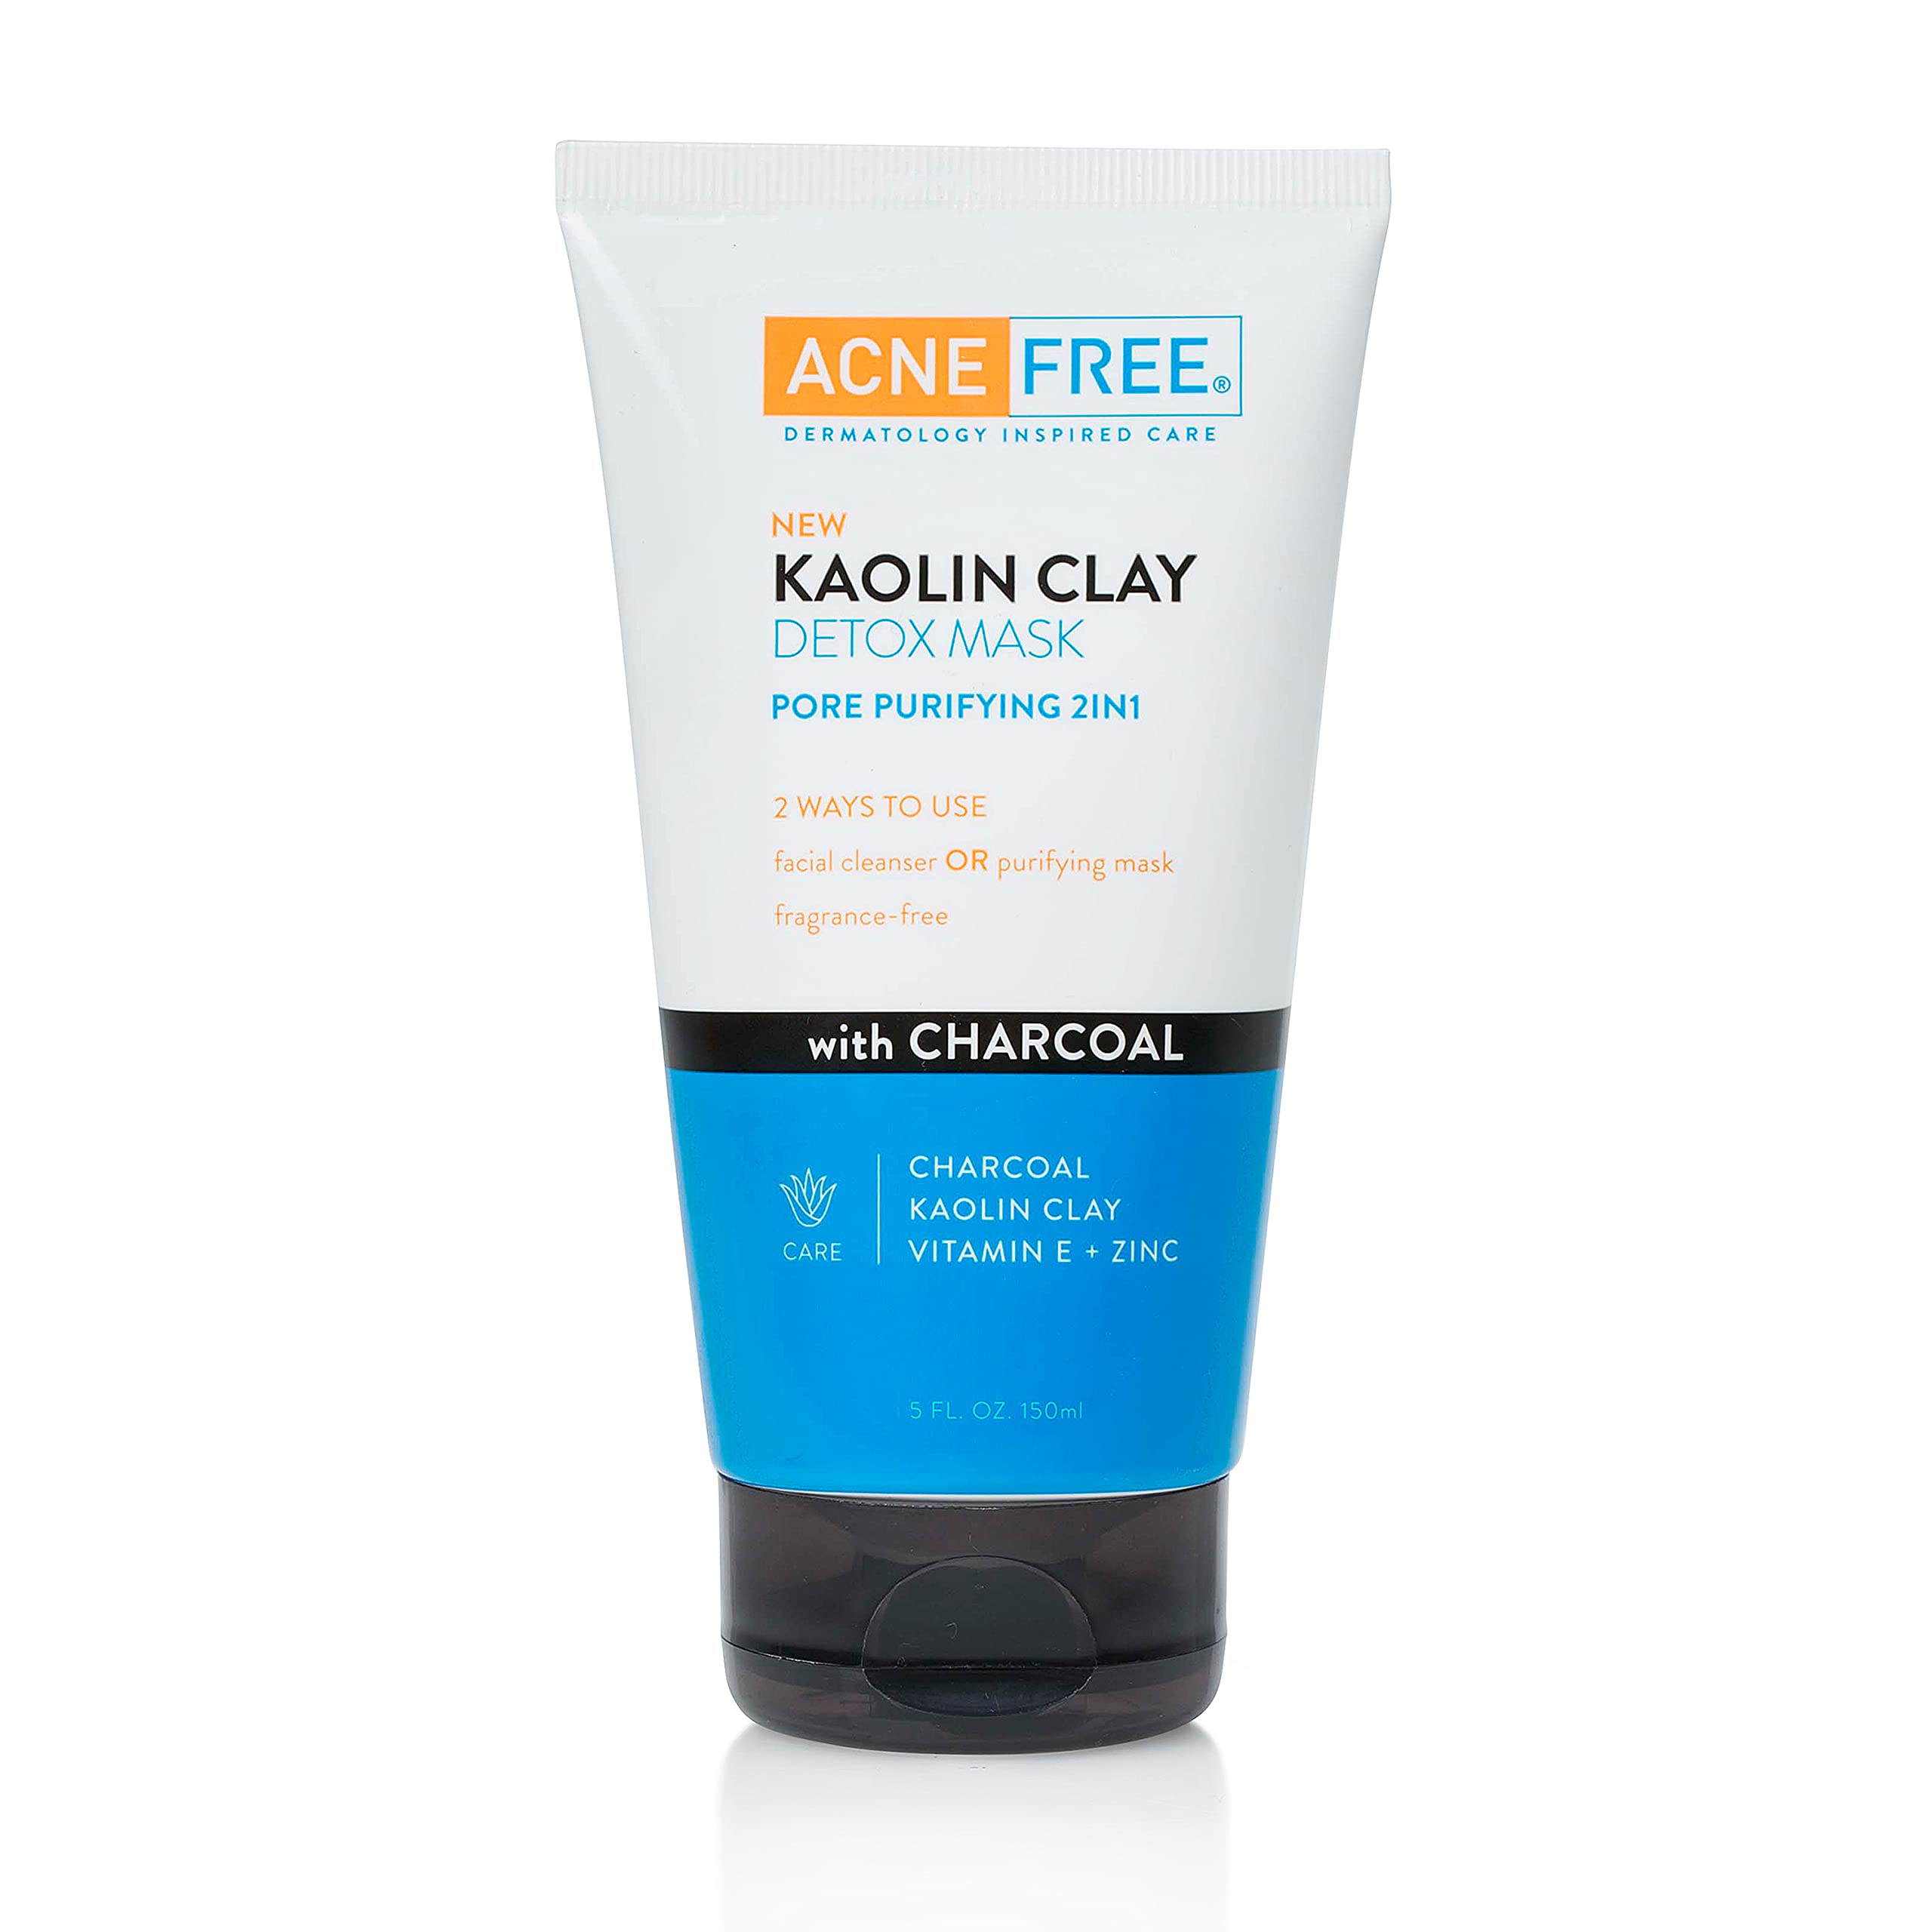 AcneFree Acne Free Kaolin Clay Detox Mask 5oz with Charcoal, Kaolin Clay, Vitamin E + Zinc, Cleanser or Mask for Oily Skin, To Deeply Cle